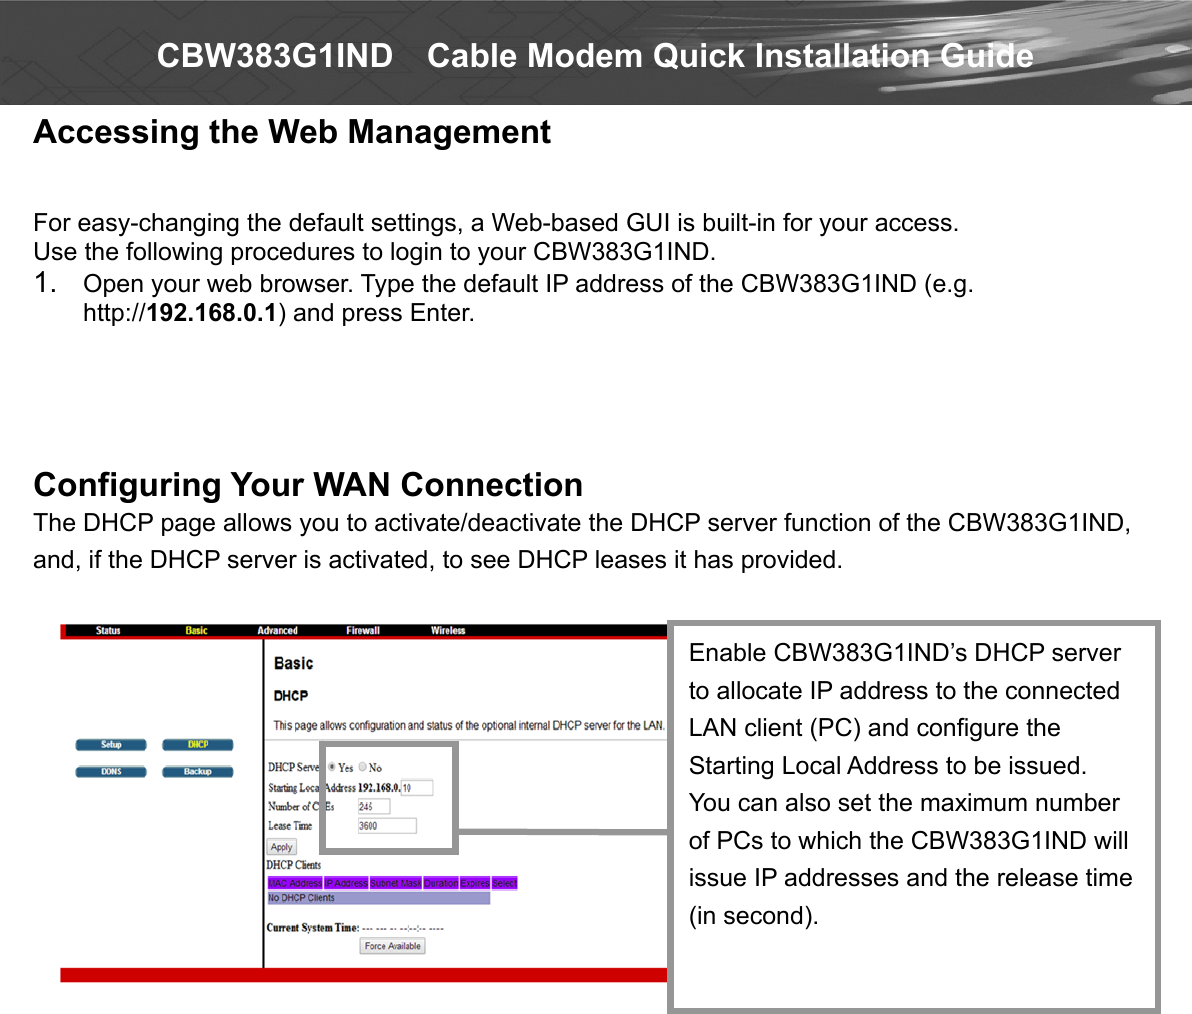  CBW383G1IND    Cable Modem Quick Installation Guide Accessing the Web Management   For easy-changing the default settings, a Web-based GUI is built-in for your access. Use the following procedures to login to your CBW383G1IND. 1.  Open your web browser. Type the default IP address of the CBW383G1IND (e.g. http://192.168.0.1) and press Enter.     Configuring Your WAN Connection The DHCP page allows you to activate/deactivate the DHCP server function of the CBW383G1IND, and, if the DHCP server is activated, to see DHCP leases it has provided.                           Enable CBW383G1IND’s DHCP server to allocate IP address to the connected LAN client (PC) and configure the Starting Local Address to be issued. You can also set the maximum number of PCs to which the CBW383G1IND will issue IP addresses and the release time (in second). 